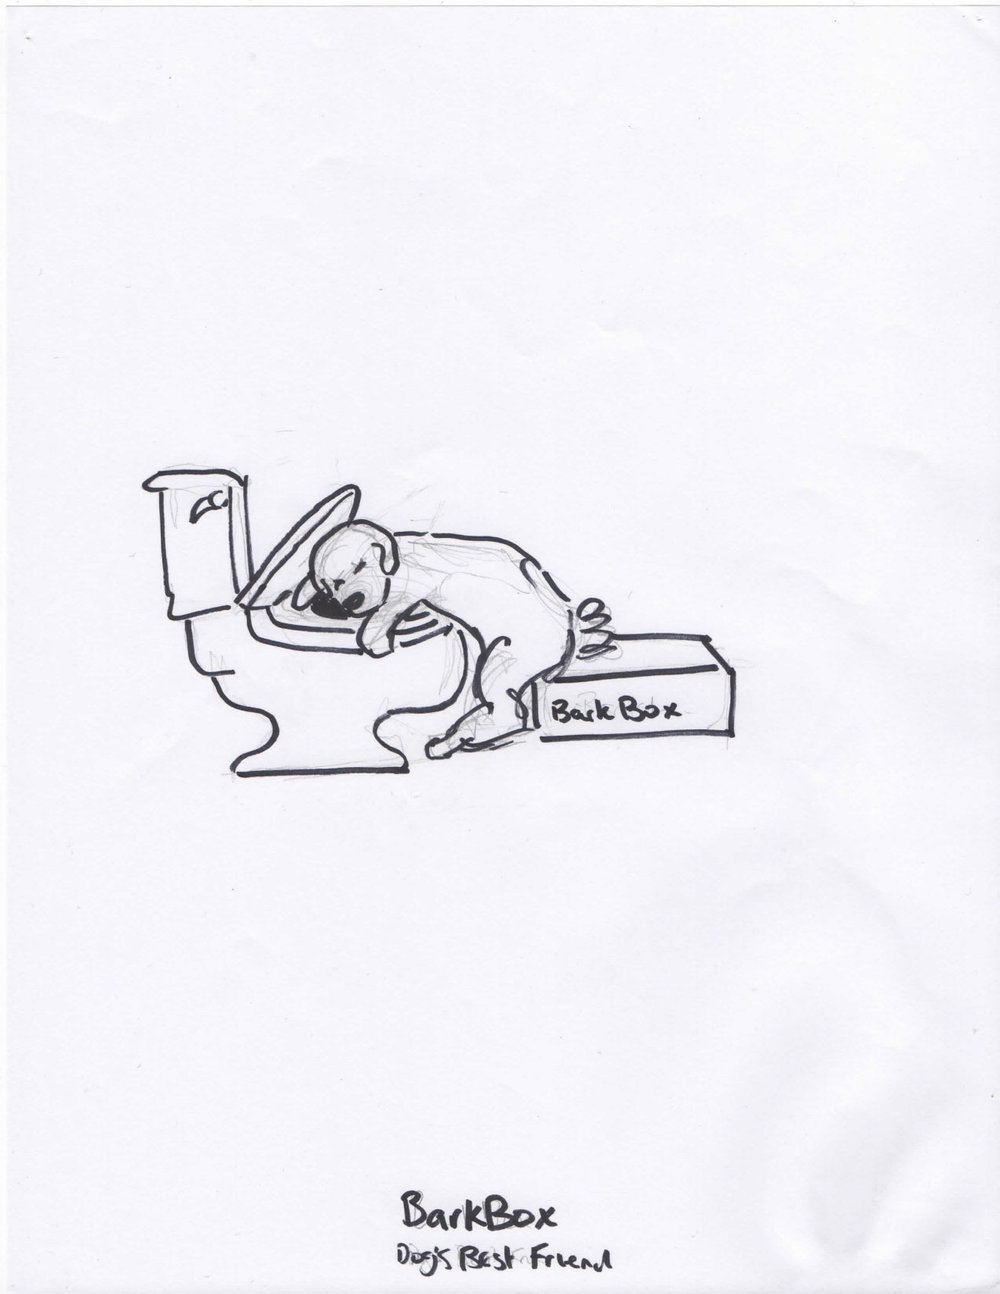 Pencil sketch of sick dog with head over toilet bowl being supported by a barkbox